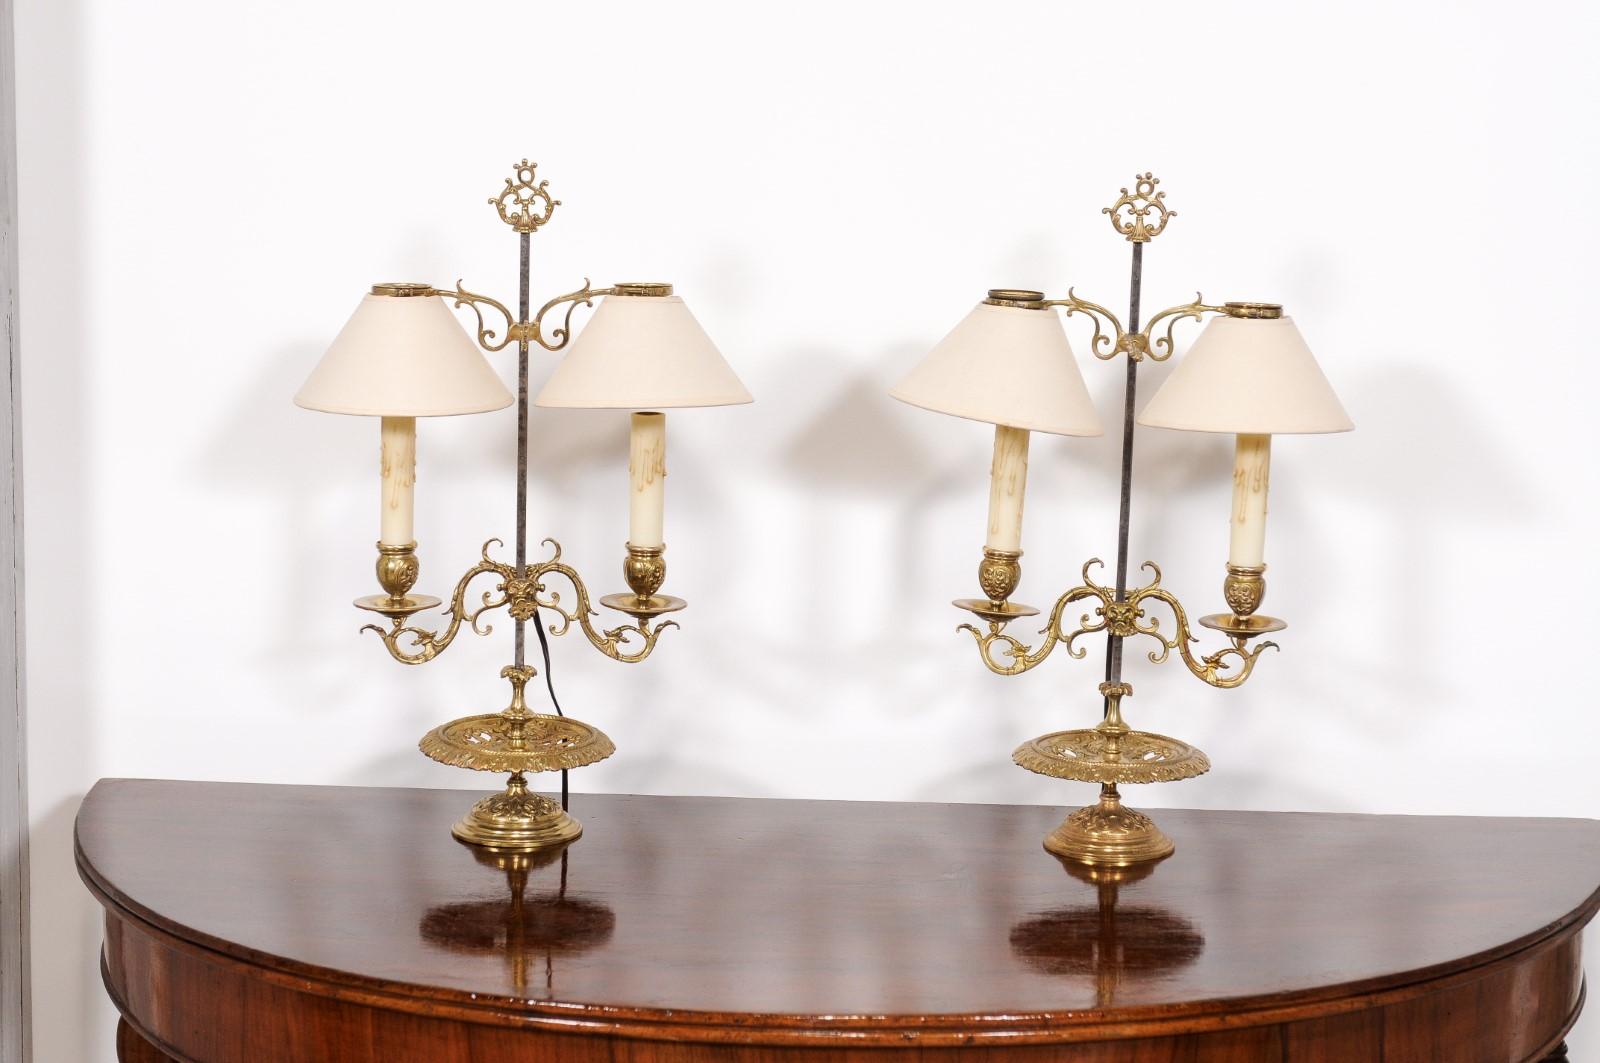 French 19th Century Brass Candlestick Lamps with Scrolling Arms, a Wired Pair For Sale 1